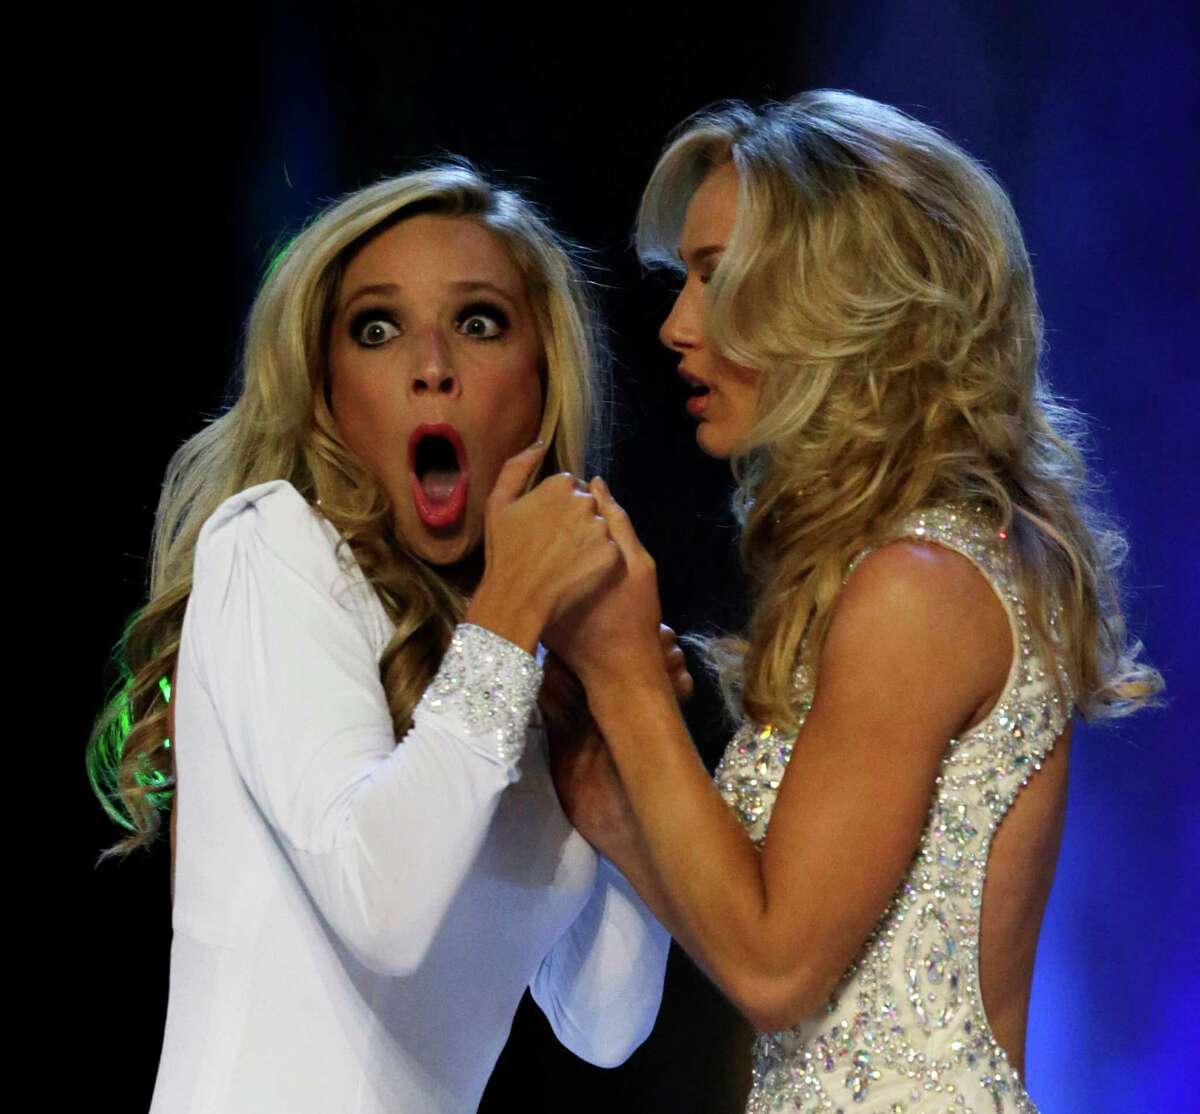 Miss New York Kira Kazantsev, left, gasps after she was named Miss America 2015 as she holds hands with Miss Virginia Courtney Paige Garrett during the Miss America 2015 pageant, Sunday, Sept. 14, 2014, in Atlantic City, N.J.